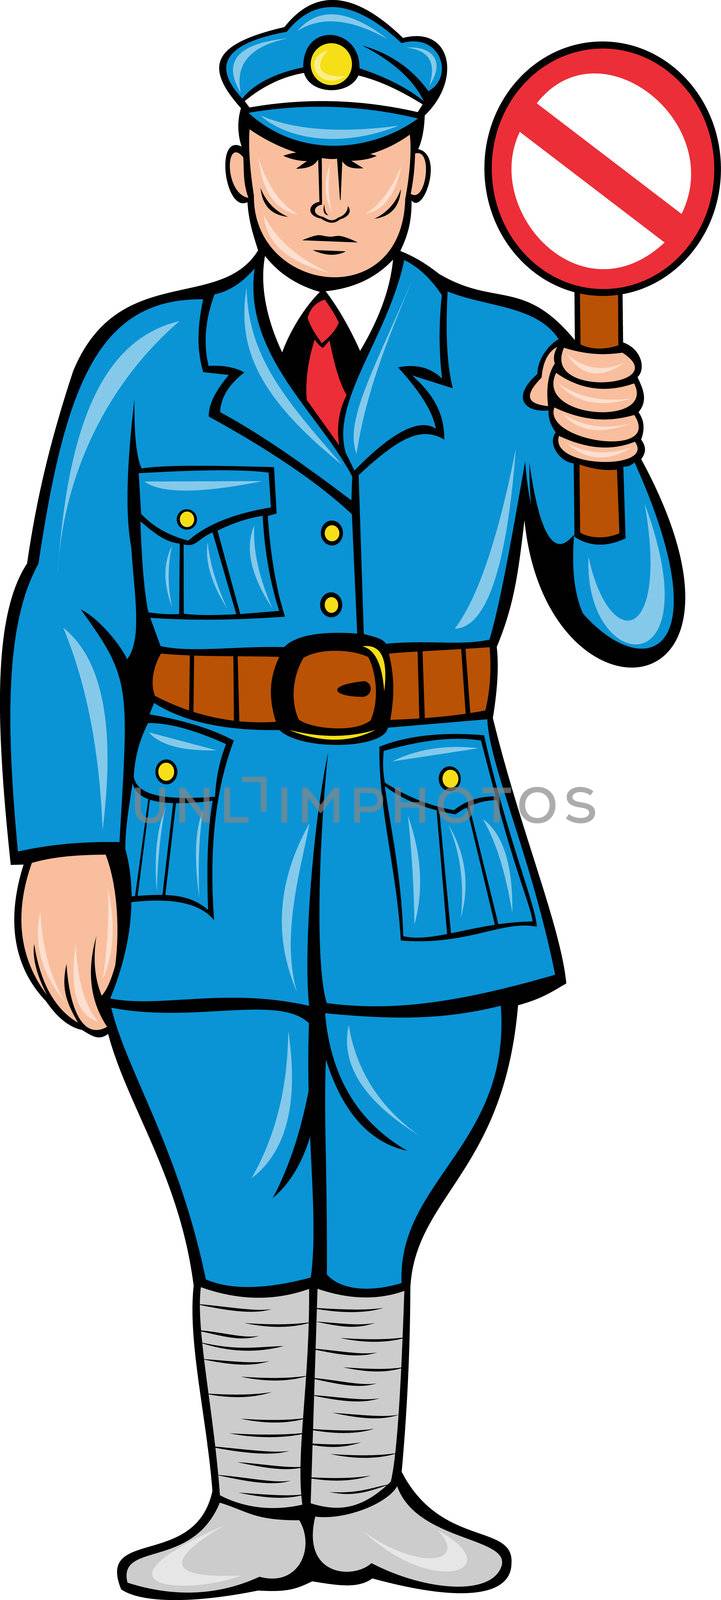 retro style illustration of a policeman or police officer with stop sign standing front view